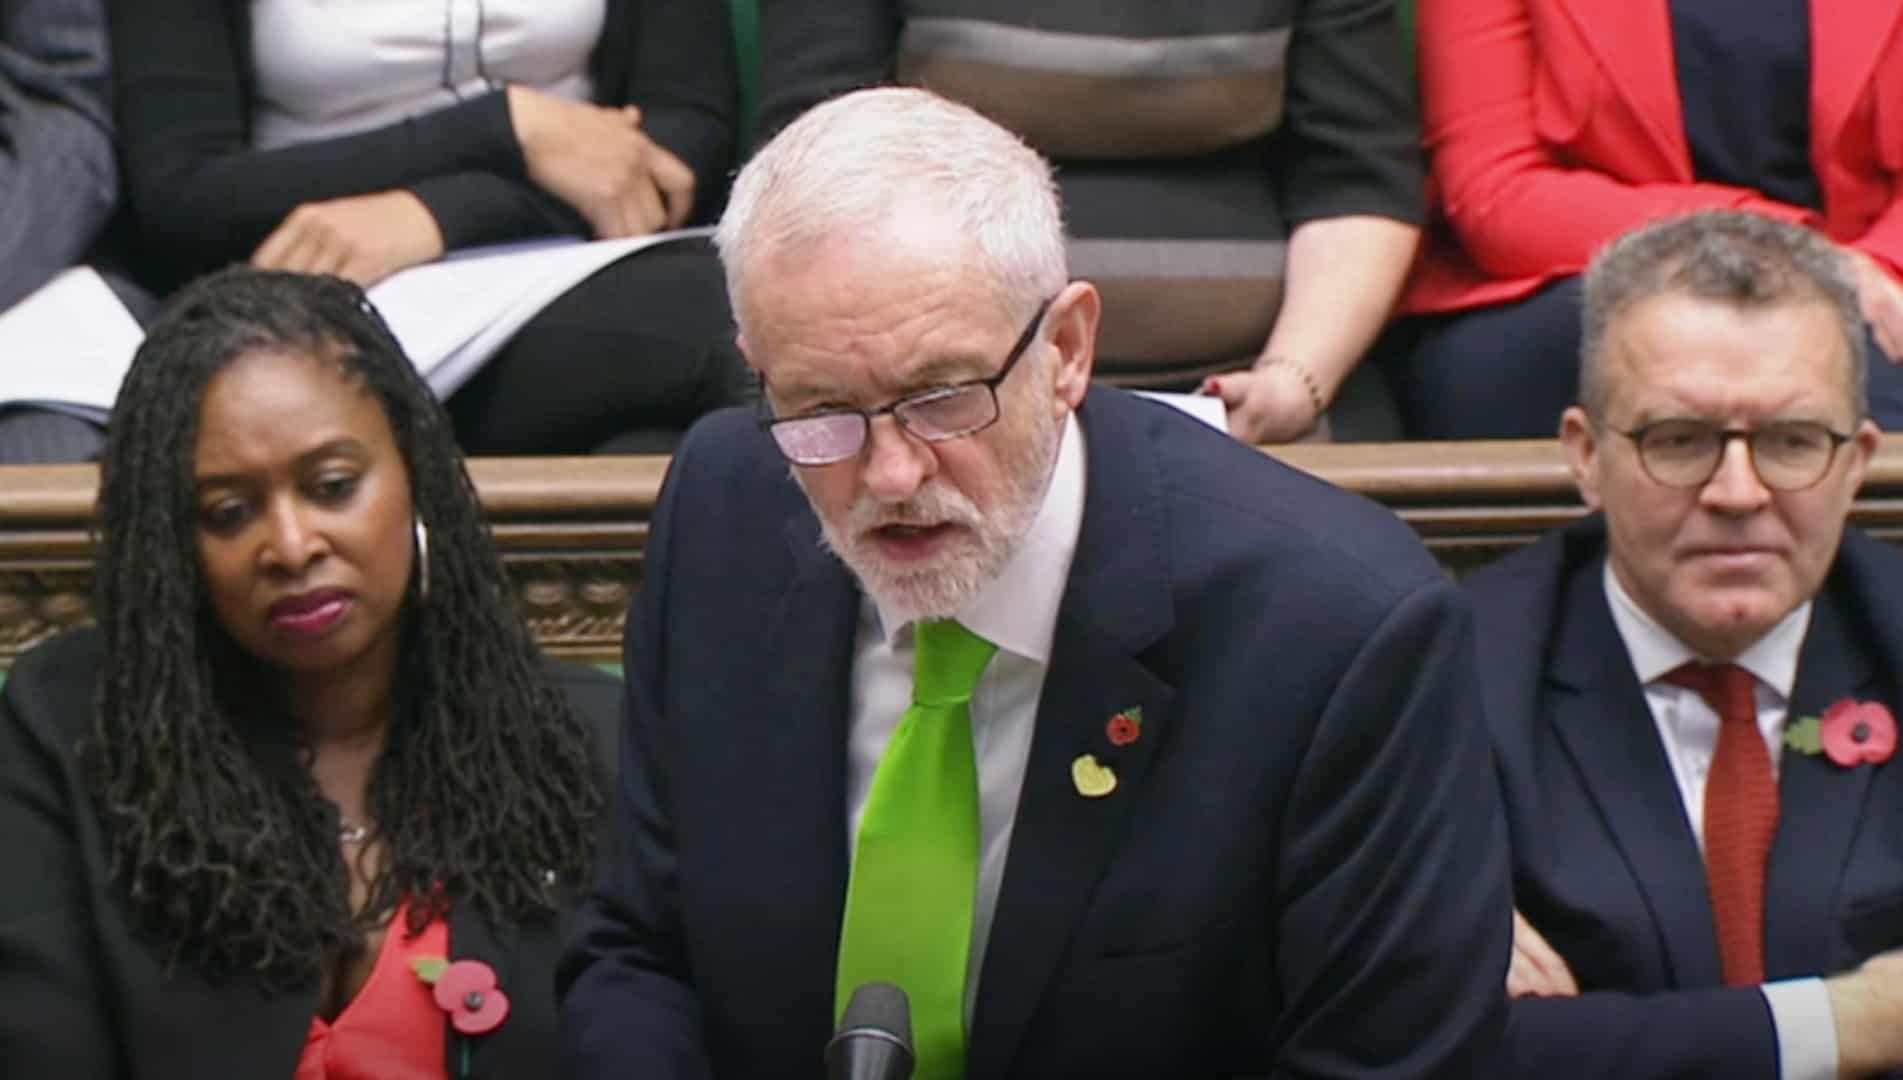 Tory MPs mock and jeer at Jeremy Corbyn’s green tie to honour Grenfell victims